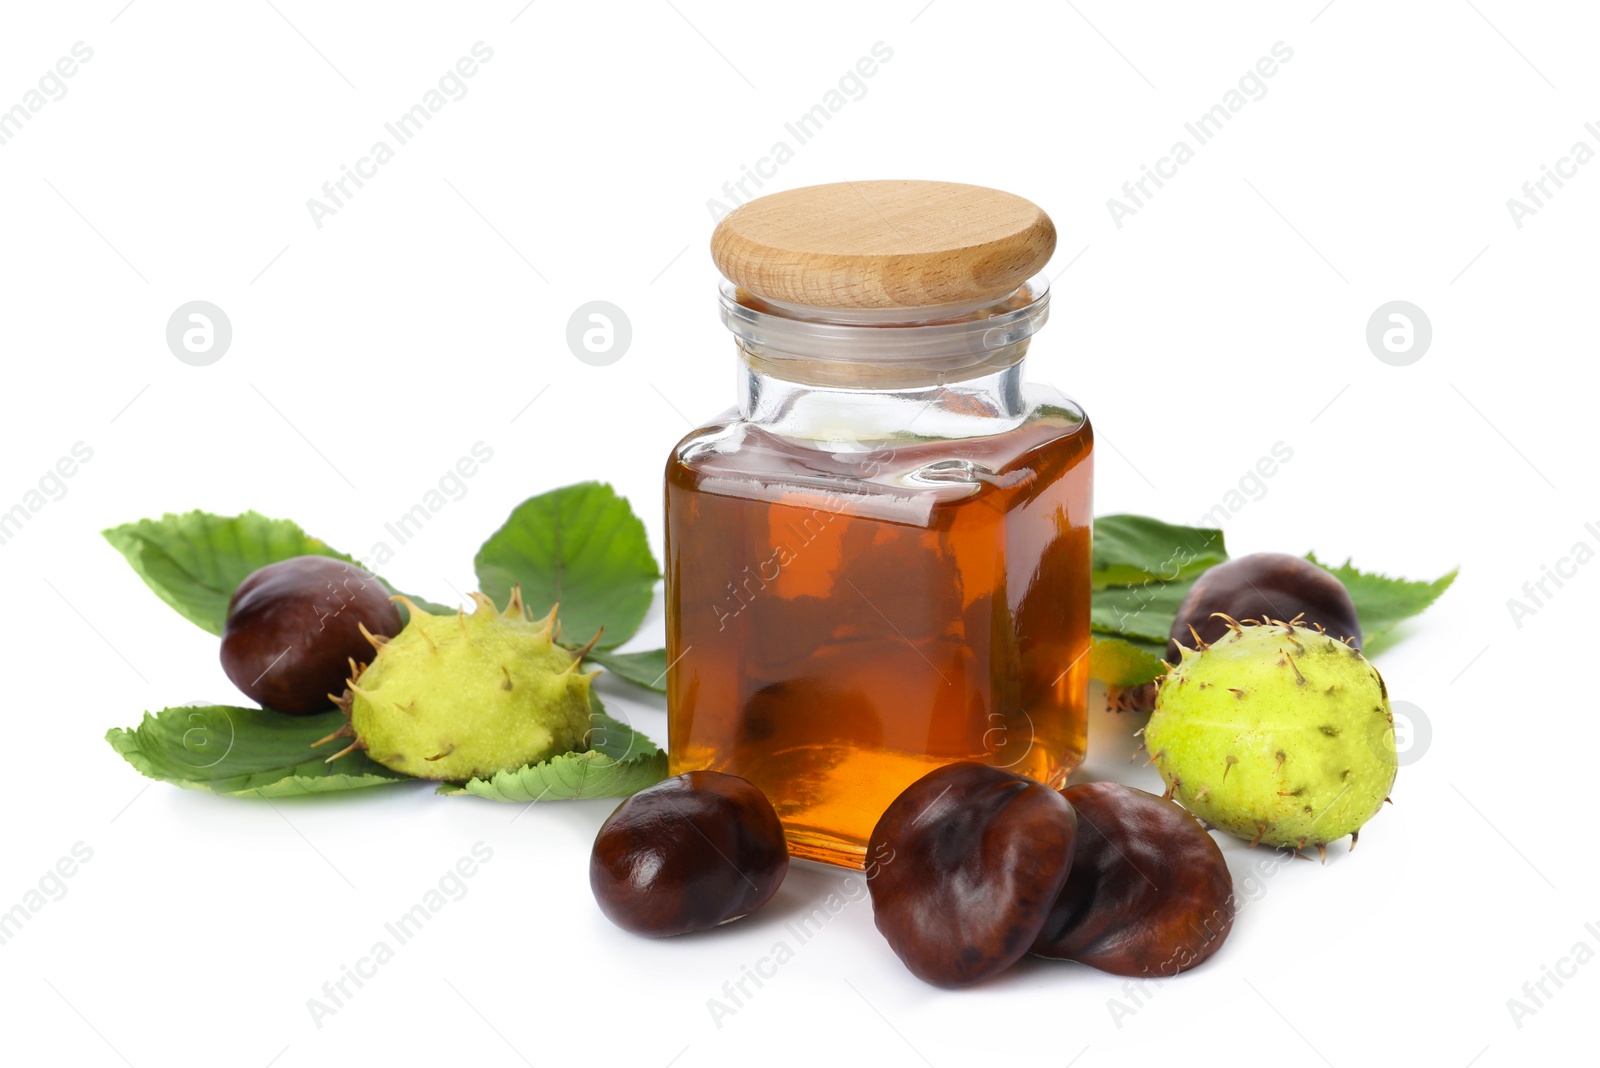 Photo of Horse chestnuts, bottle of tincture and green leaves on white background